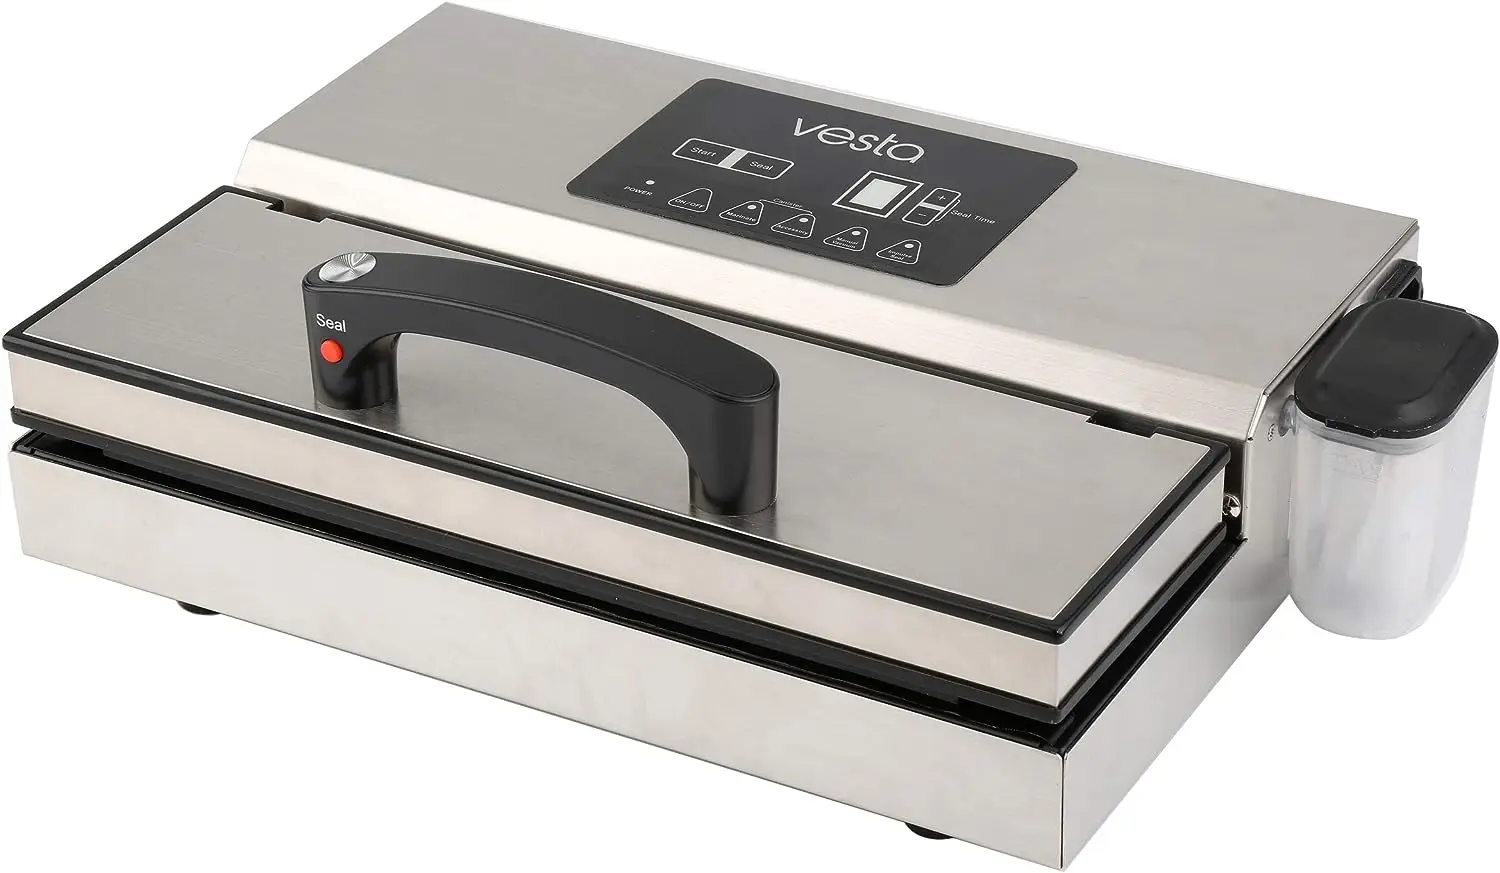 

Vacuum Sealer by Vesta Precision - n Pro II | Fast Sealing | Built-in Pressure Sensor for Automatic Sealing | Extends Food Fre